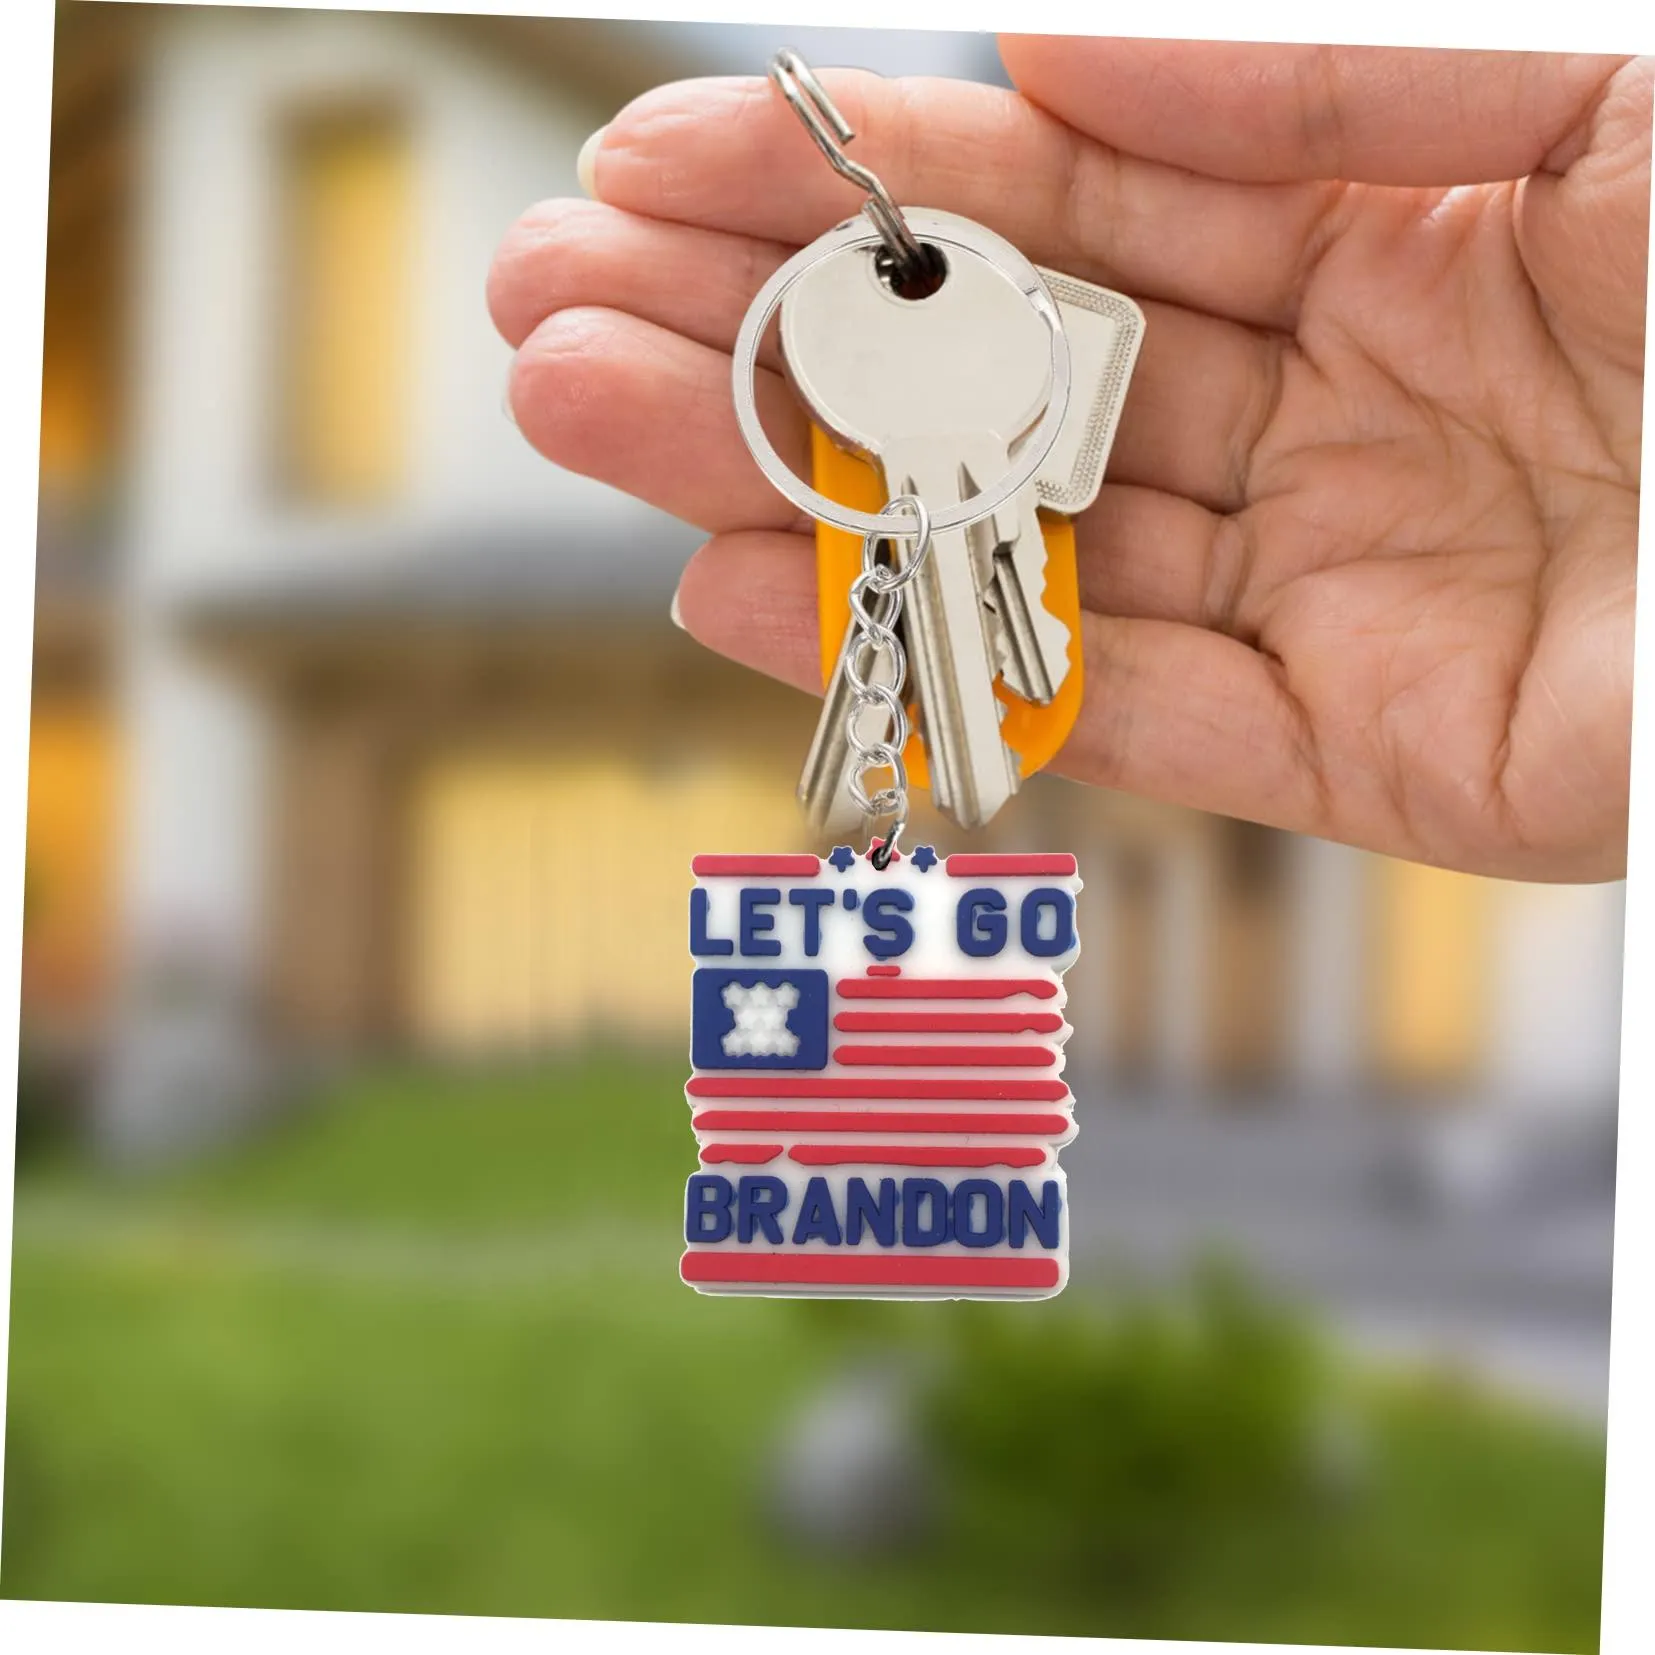 lets go brandon10 keychain goodie bag stuffers supplies key rings backpack shoulder pendant accessories charm keyring suitable for schoolbag car anime cool keychains backpacks men